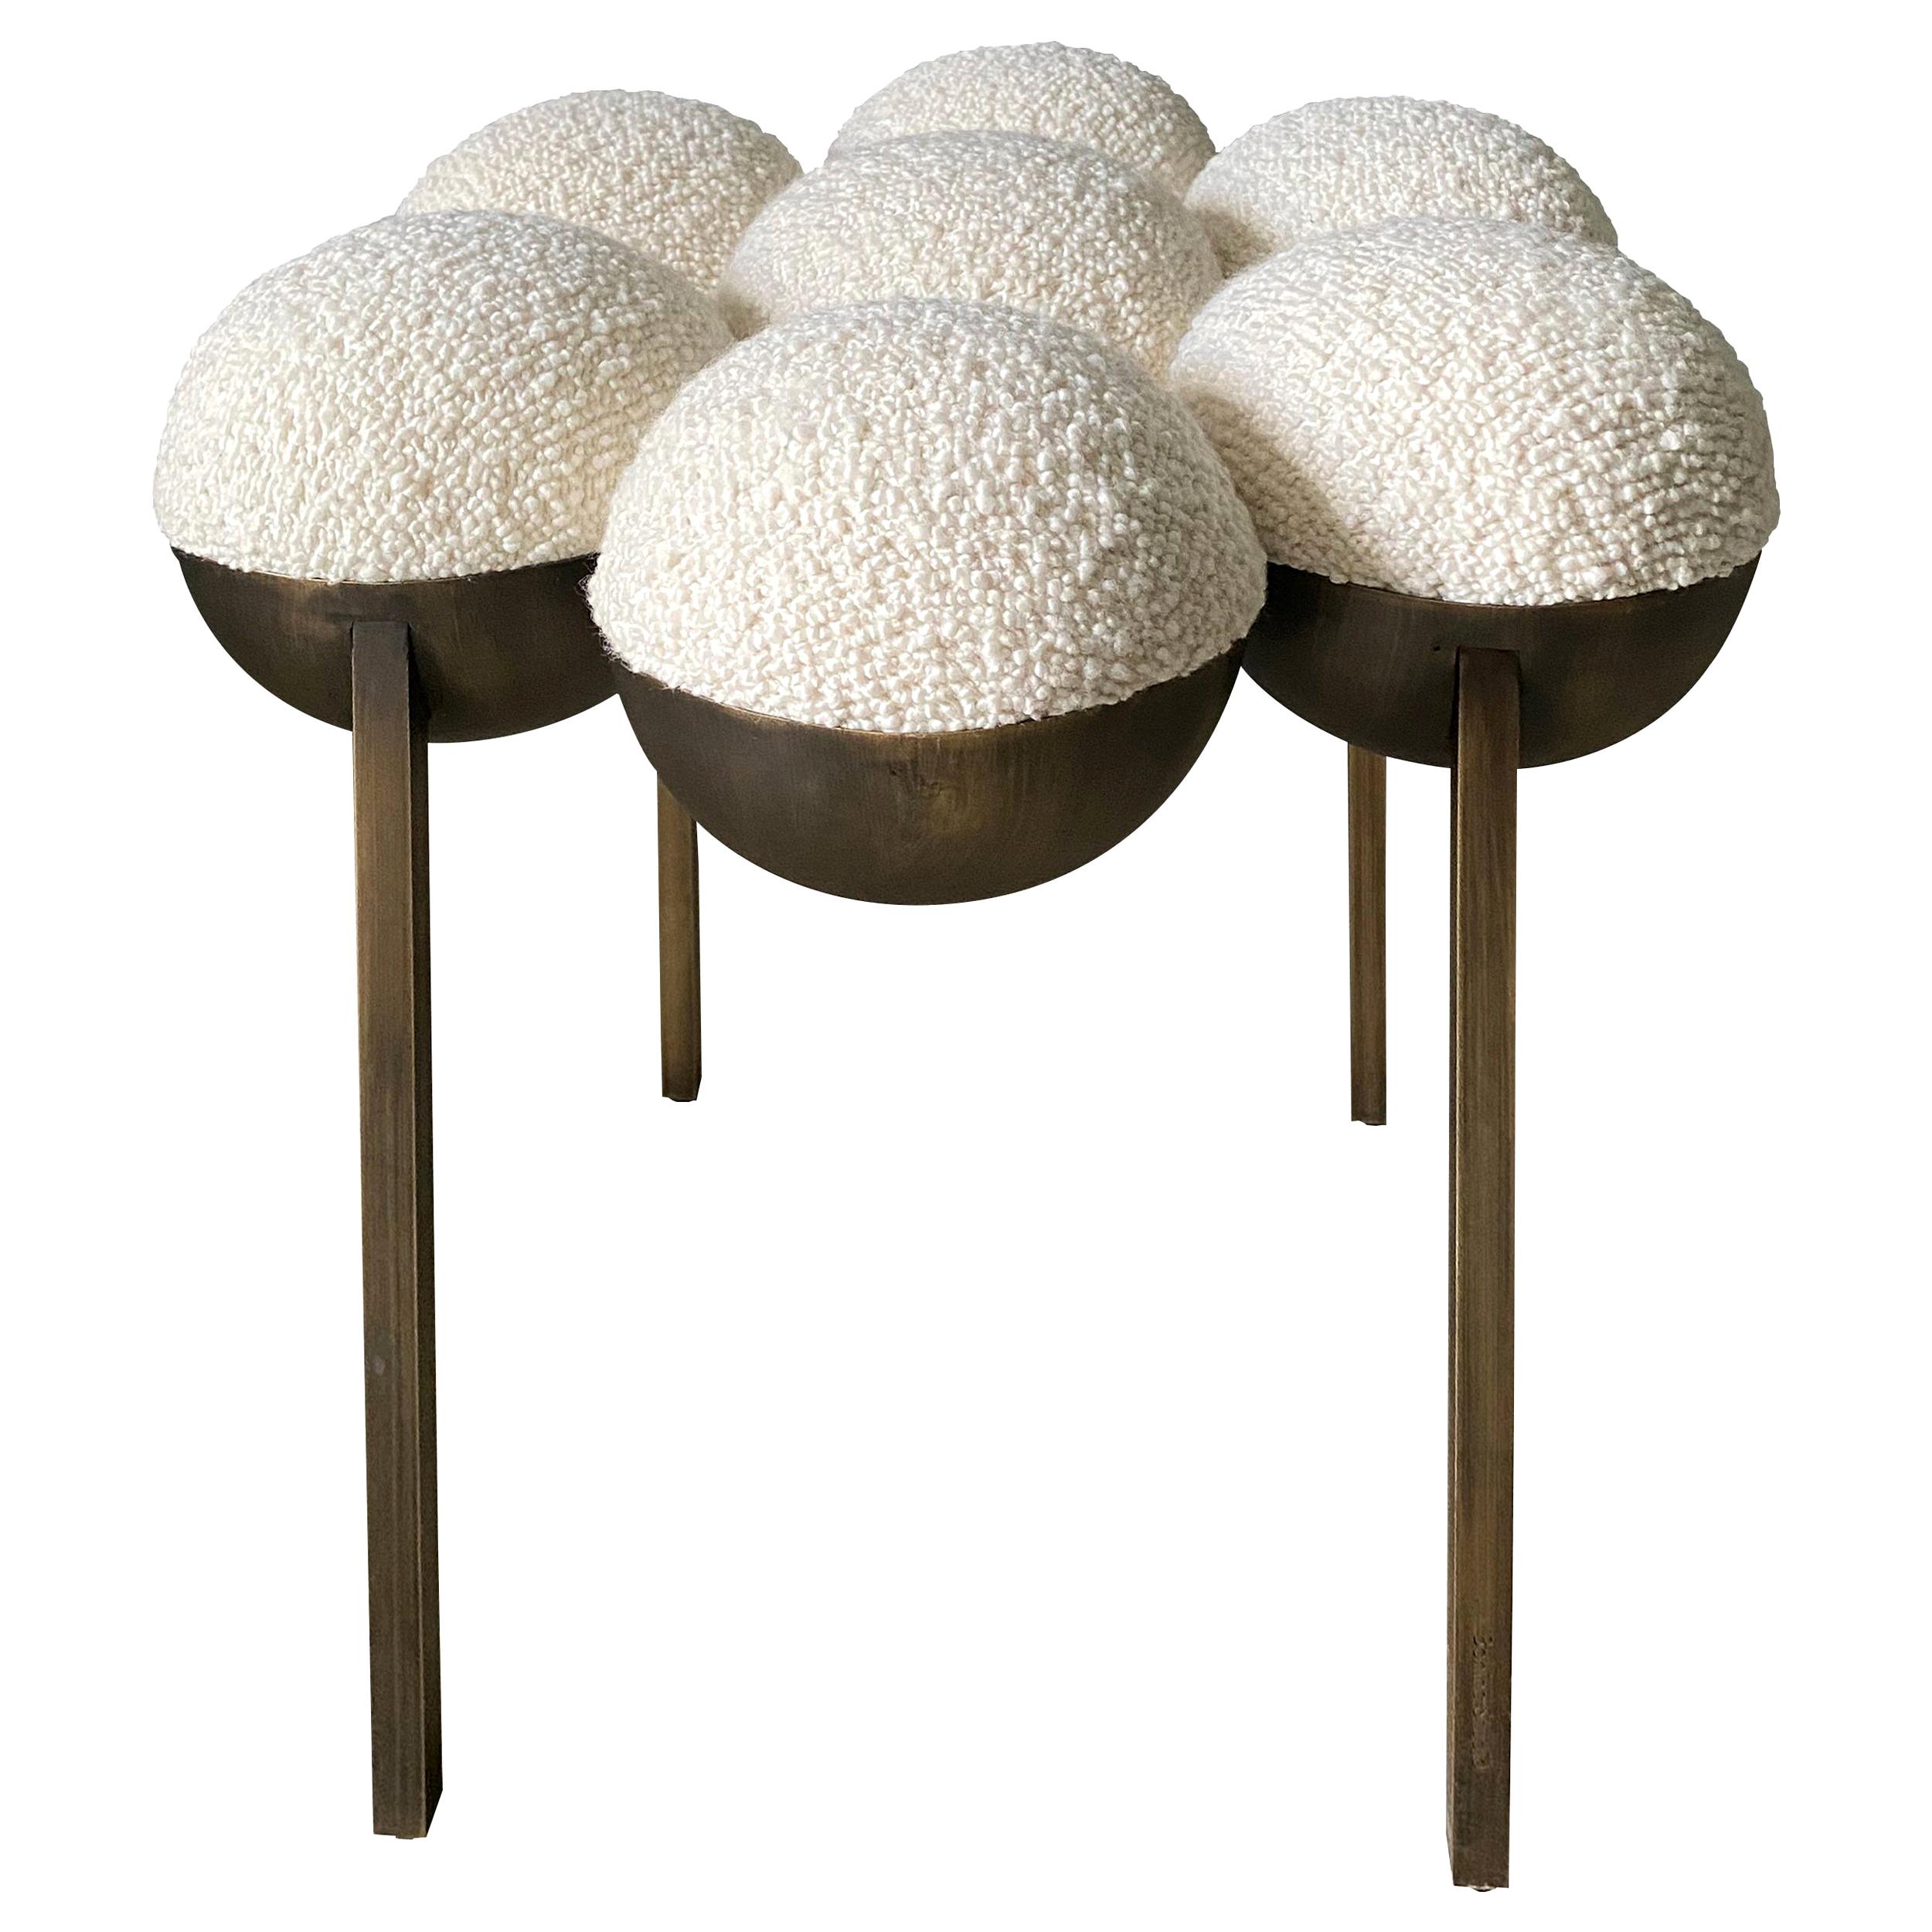 The Saturn pouffe utilizes gathered bilboquet seat construction, to create a more simplified but still incredibly distinctive form. The sumptuously undulating seat instantly appeals with its invitingly upholstered comfort, while the graceful